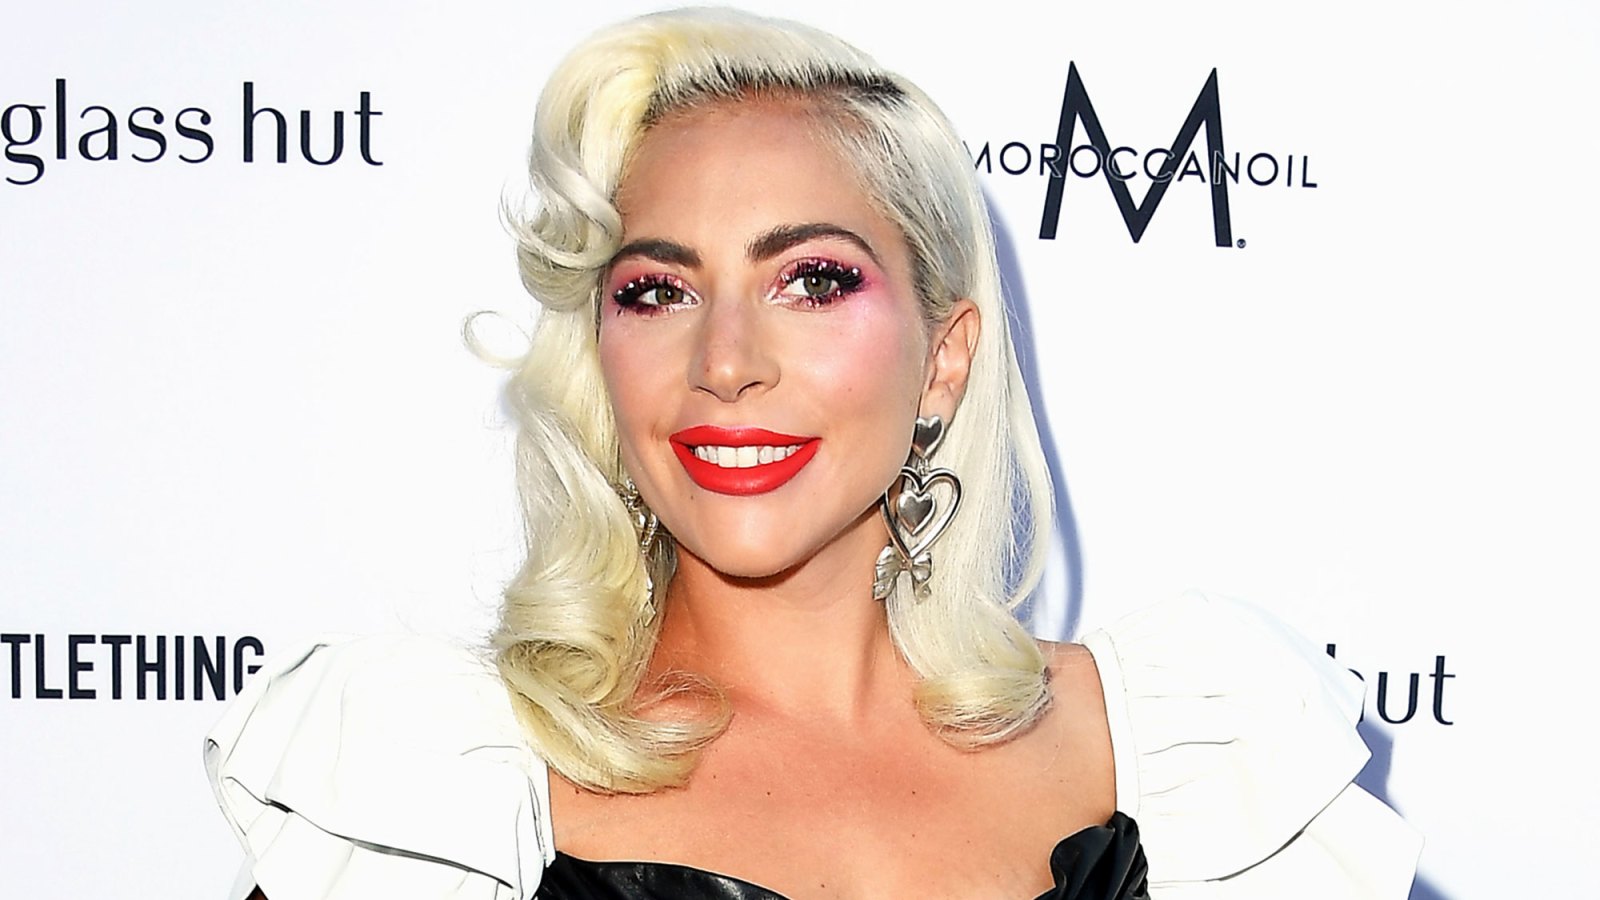 Lady Gaga's Haus Beauty line Is Lady Gaga Gearing Up to Drop Her Beauty Line... in Vegas?